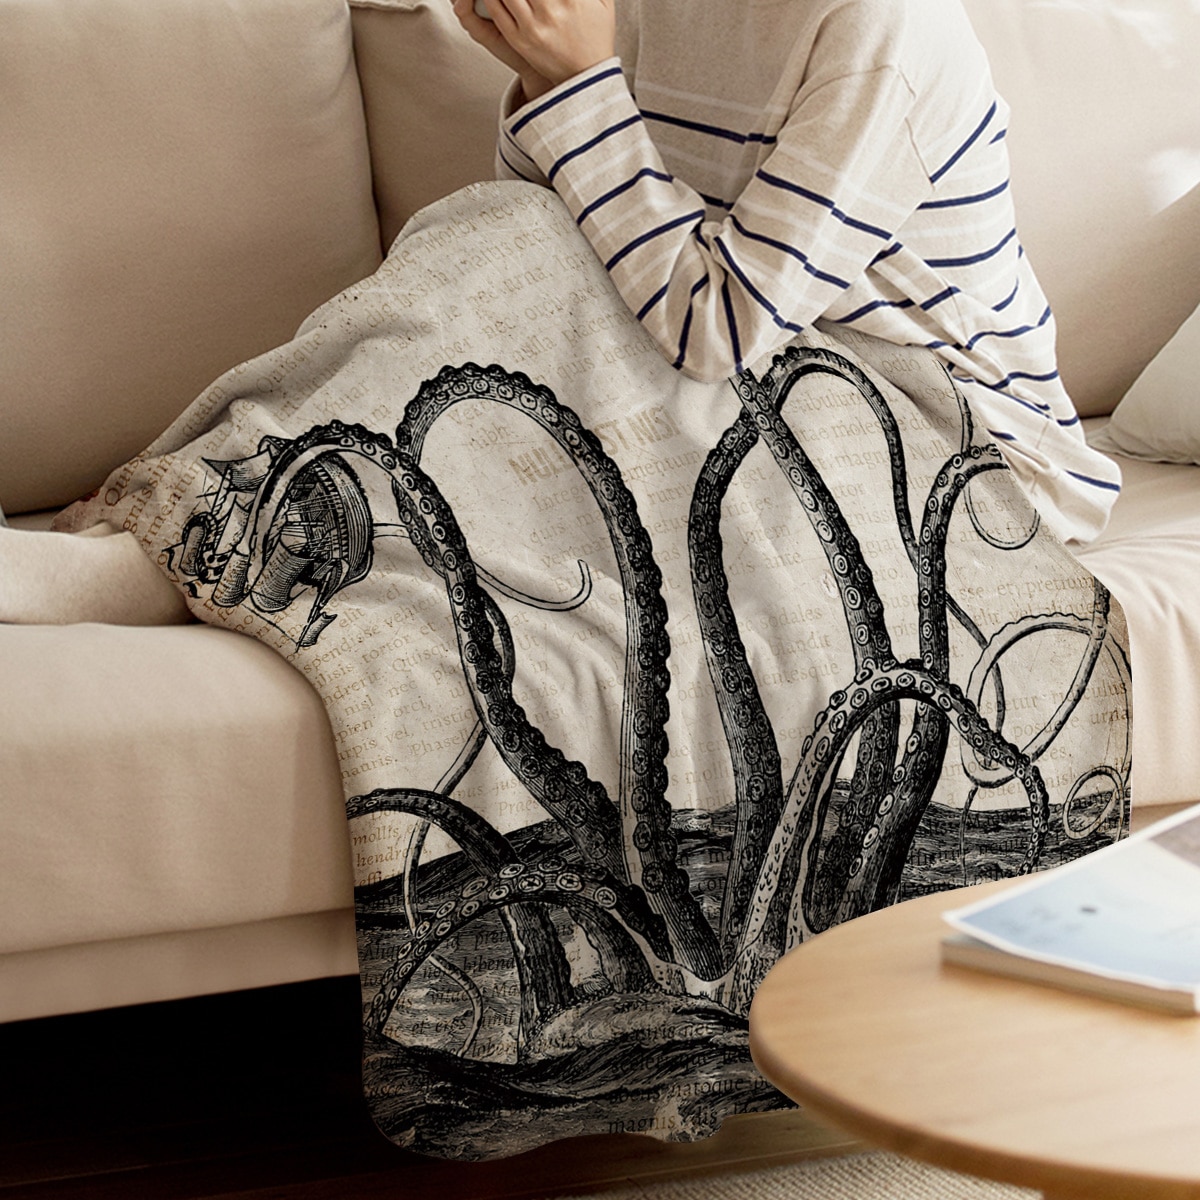 Cthulhu Octopus Old Newspaper Flannel Blanket for Bed Sofa Portable Soft Fleece Throw Funny Plush Bedspreads 2